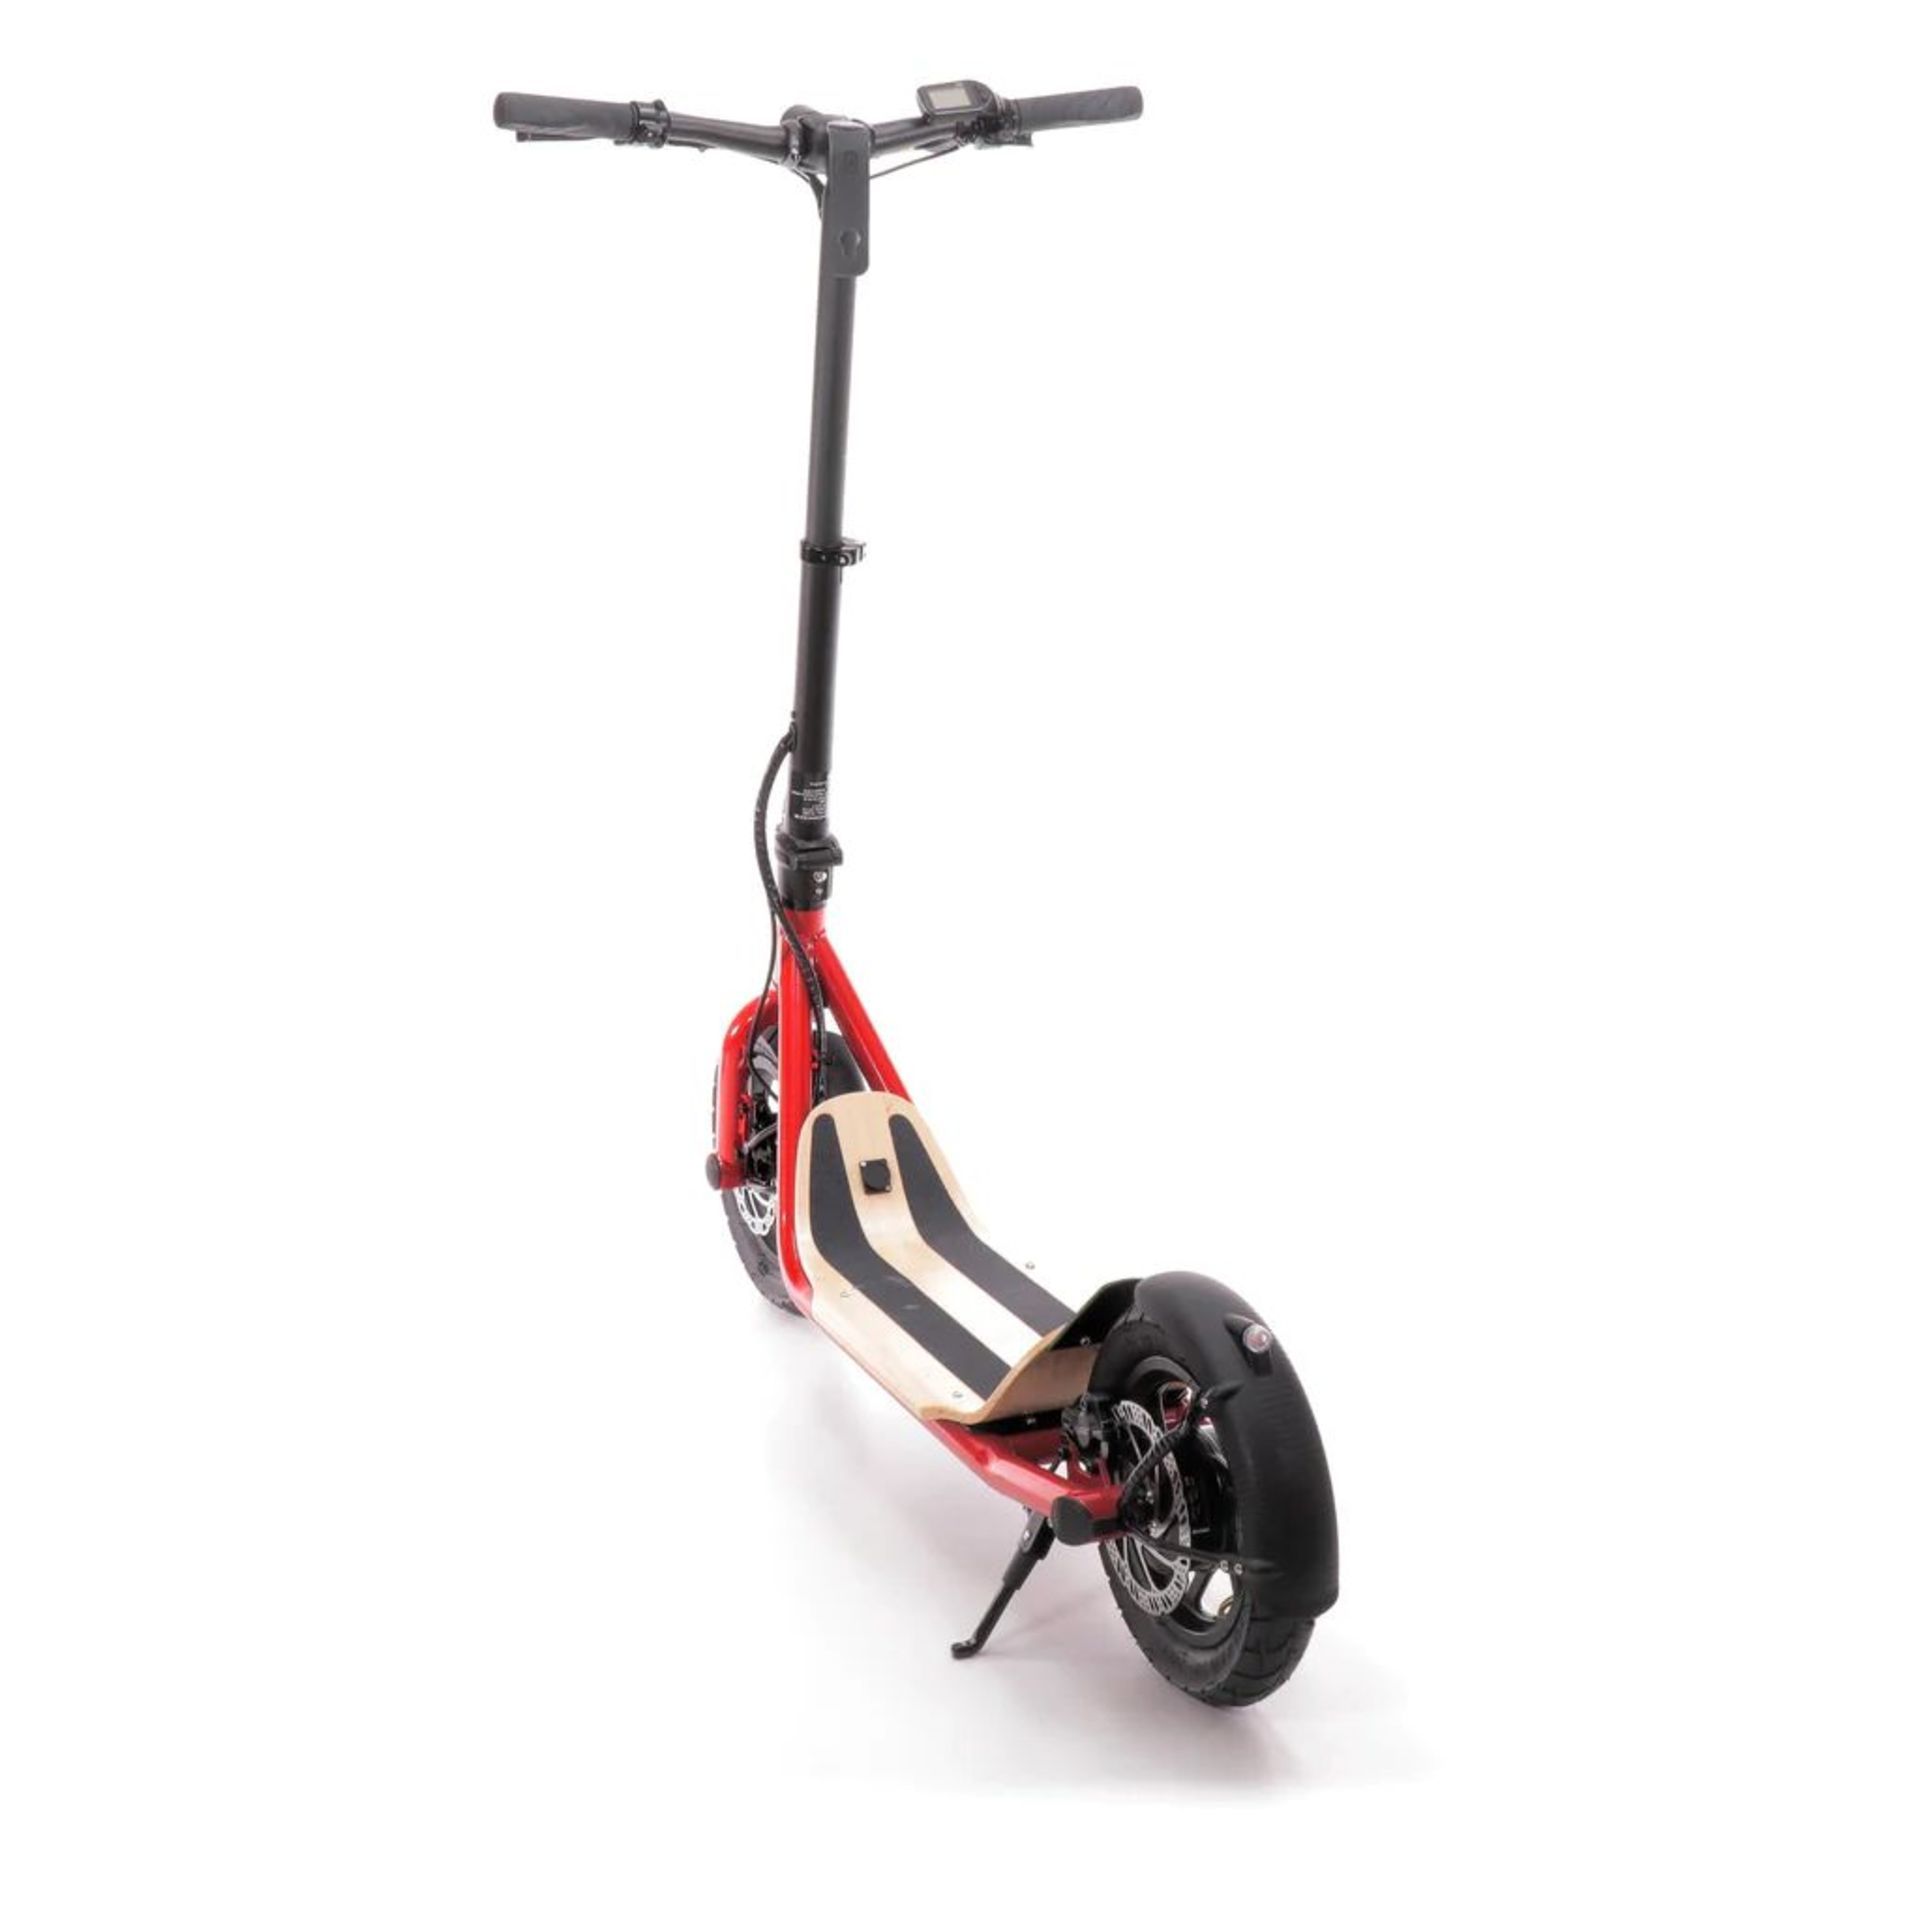 BRAND NEW 8TEV B12 PROXI CLASSIC ELECTRIC SCOOTER RED RRP £1299, Perfect city commuter vehicle - Bild 2 aus 2